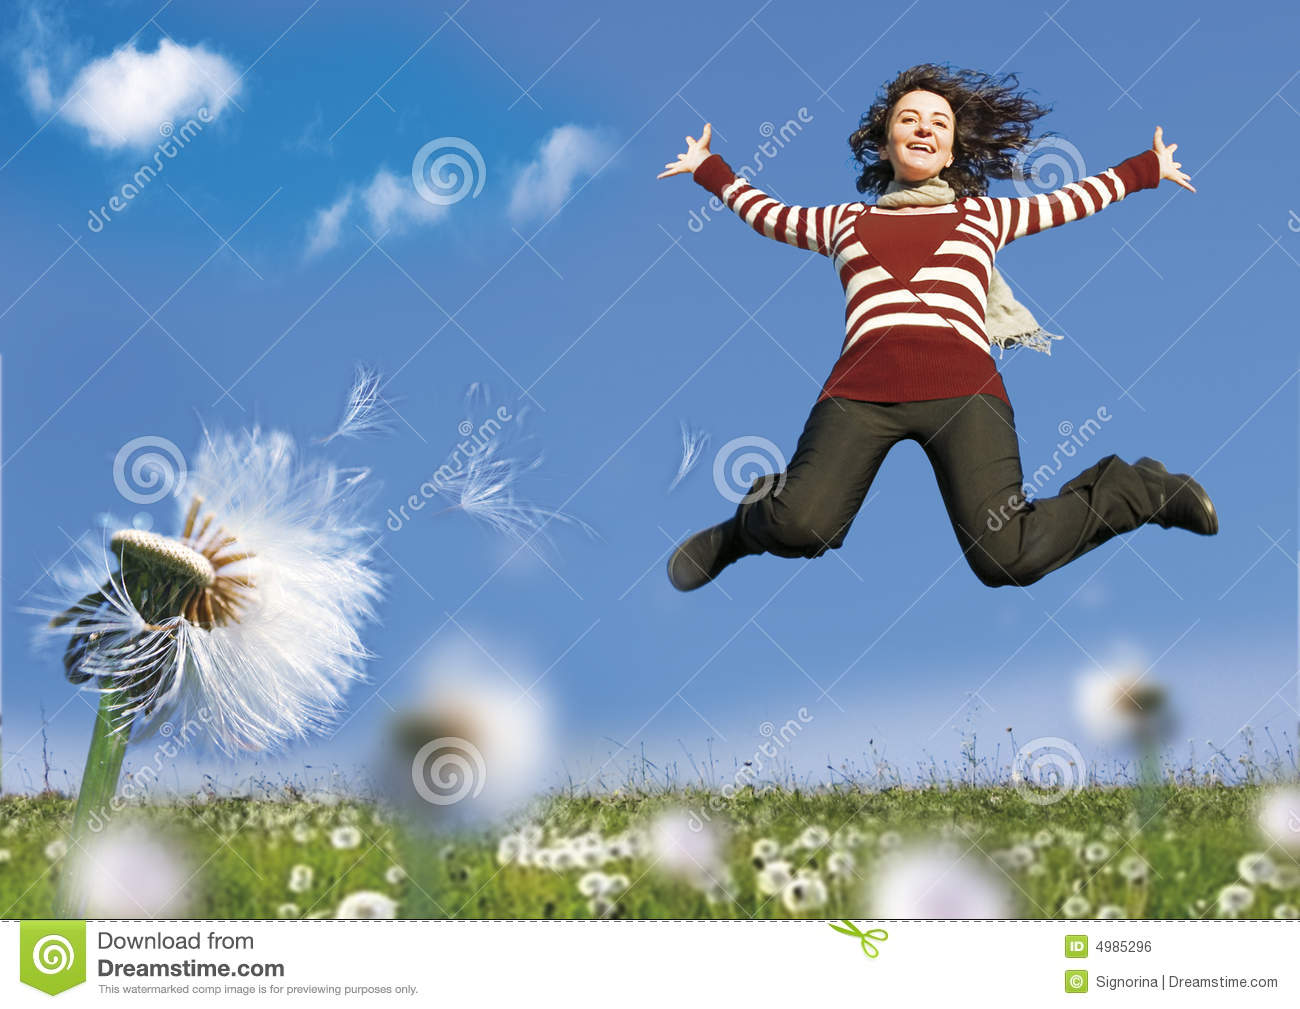 Girl Jumping In A Meadow With Dandelions 